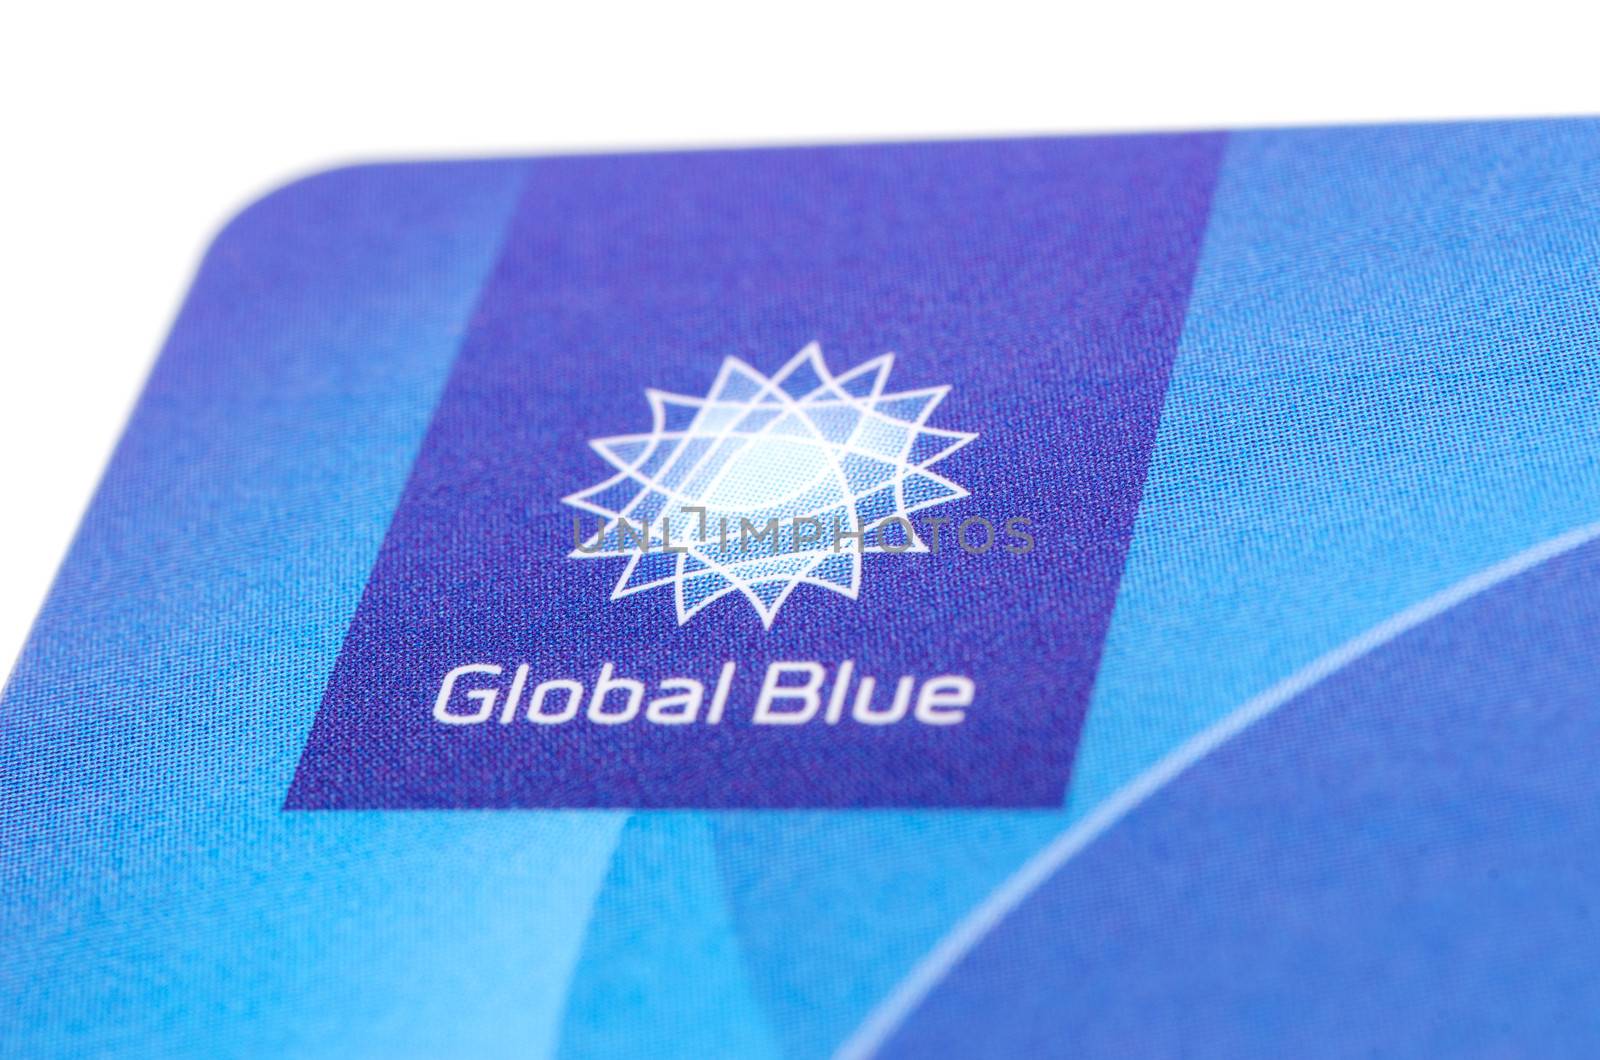 MUNICH, GERMANY - FEBRUAR 20, 2014: Close up corner of plastic card "Global Blue" with logo this tax free company. Isolated on white.